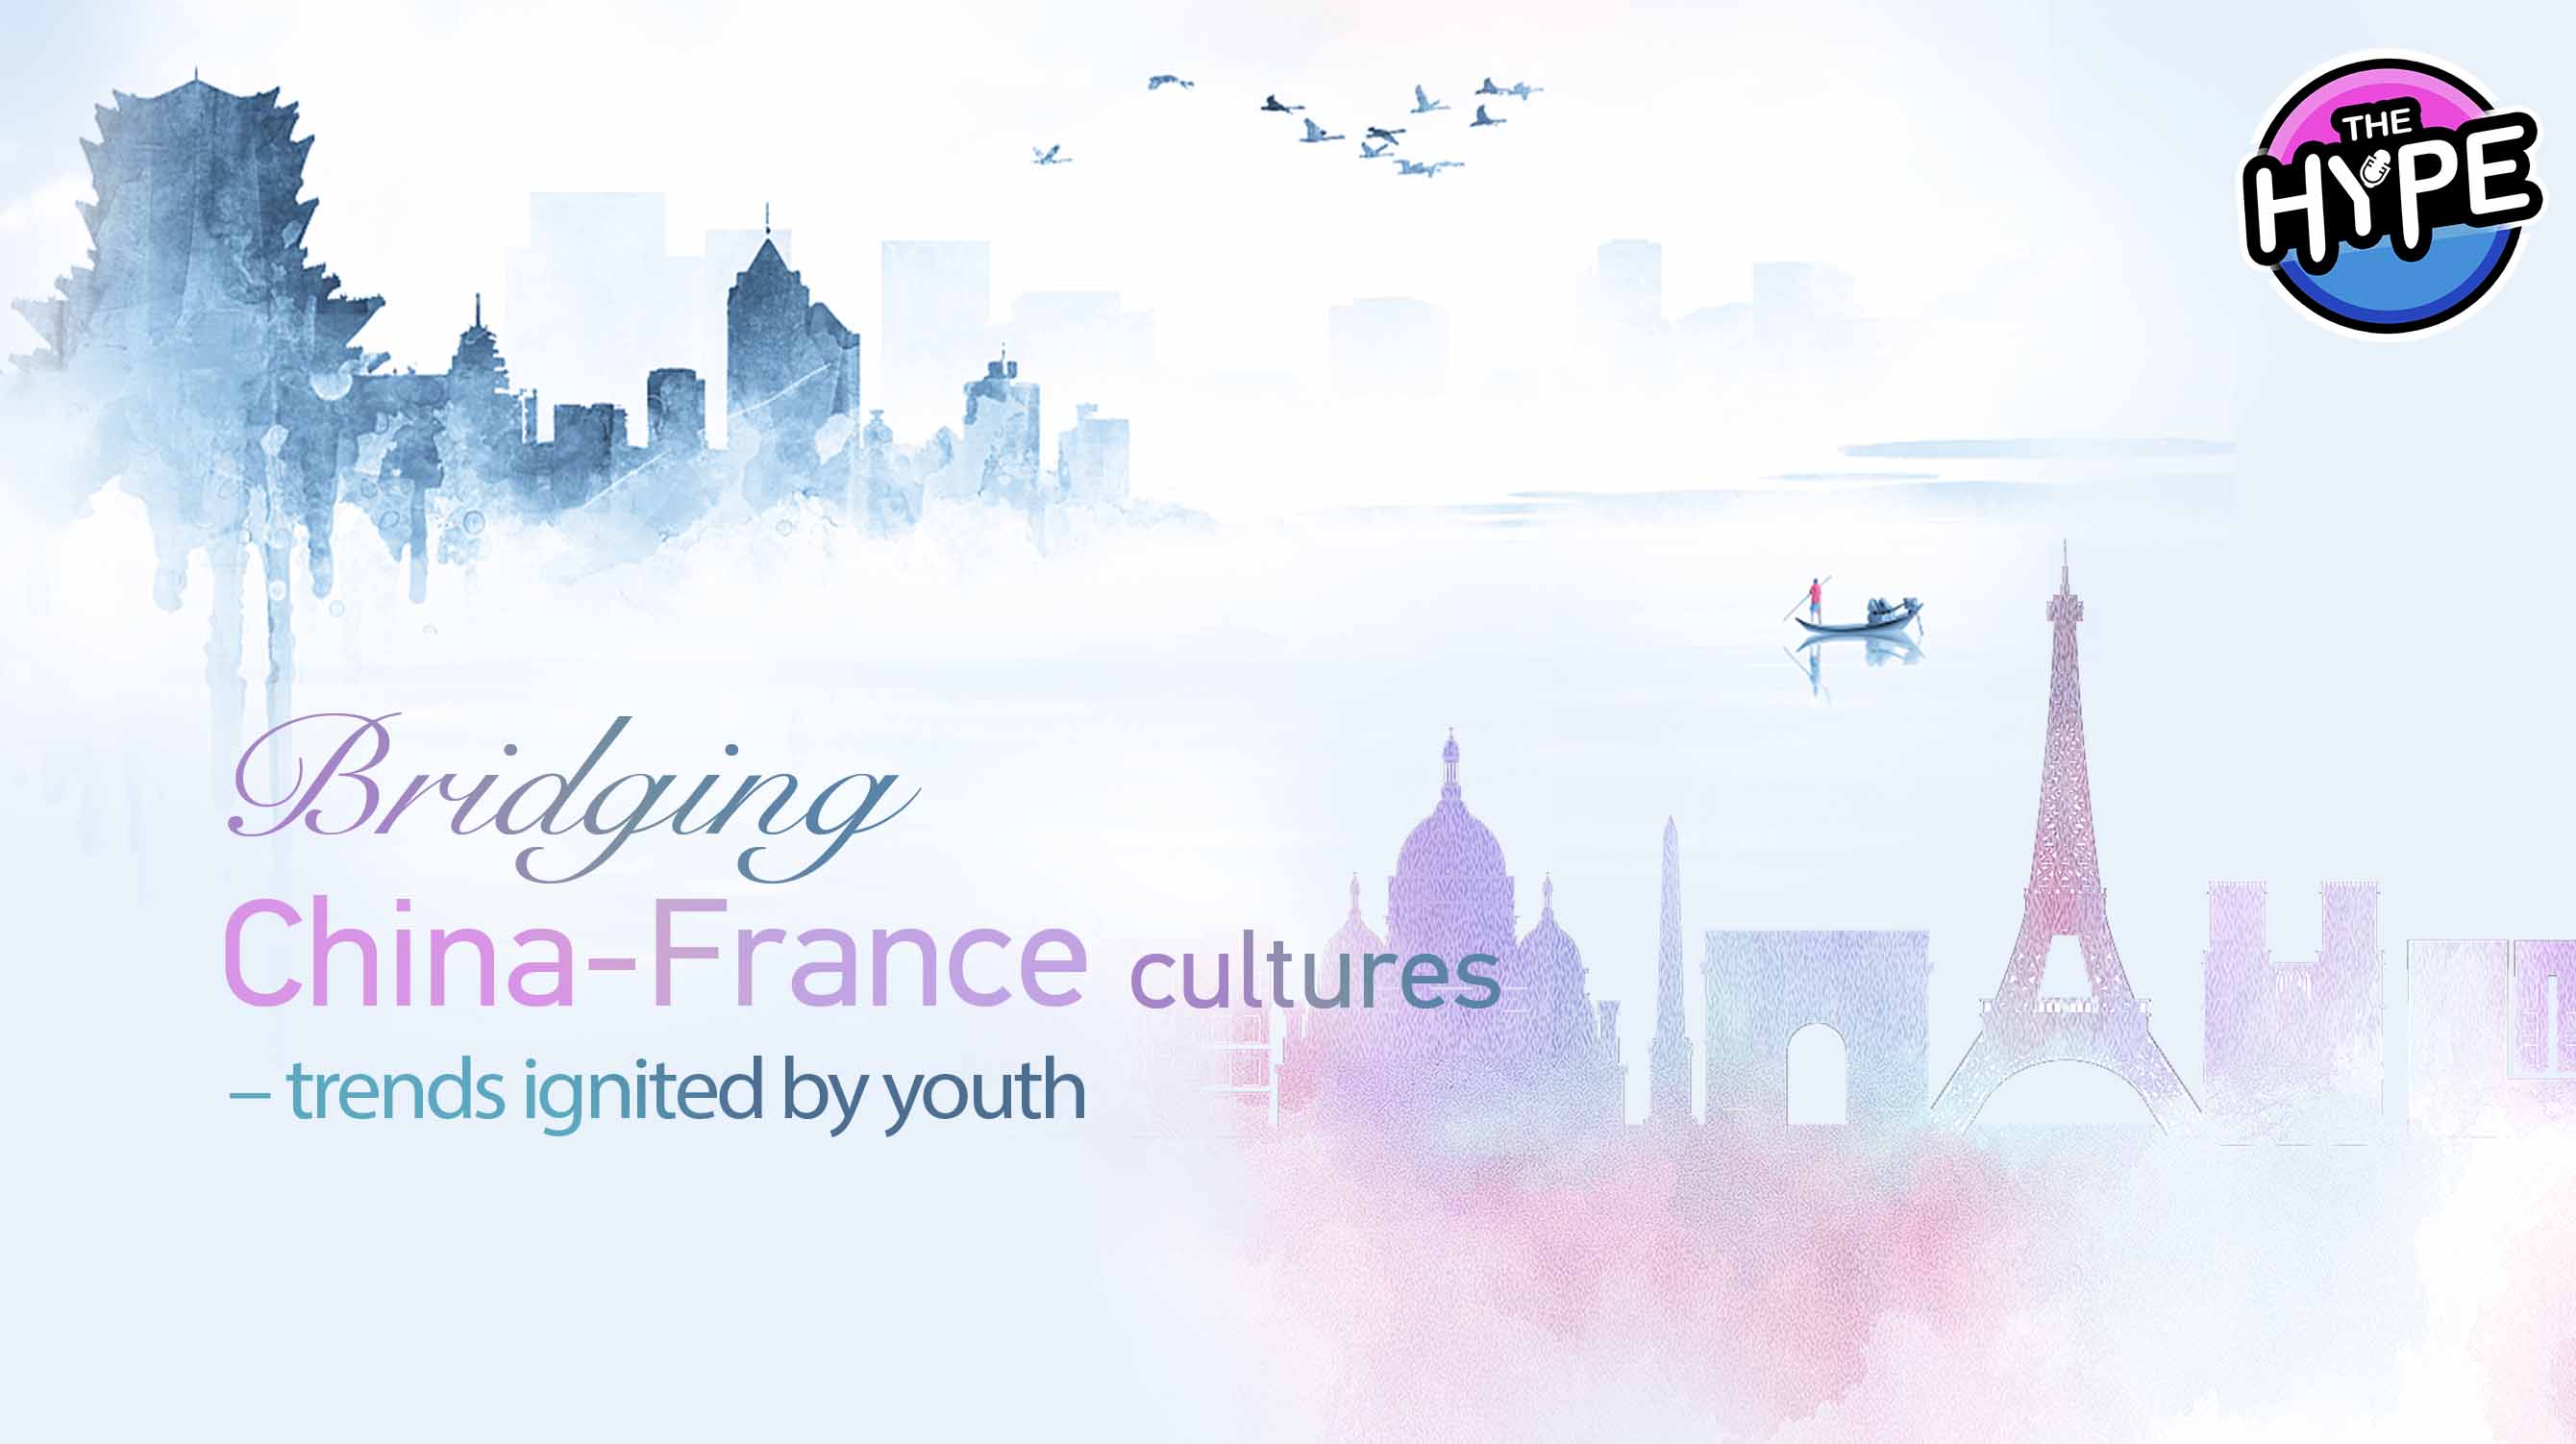 Watch: THE HYPE – Bridging China-France cultures, trends ignited by youth